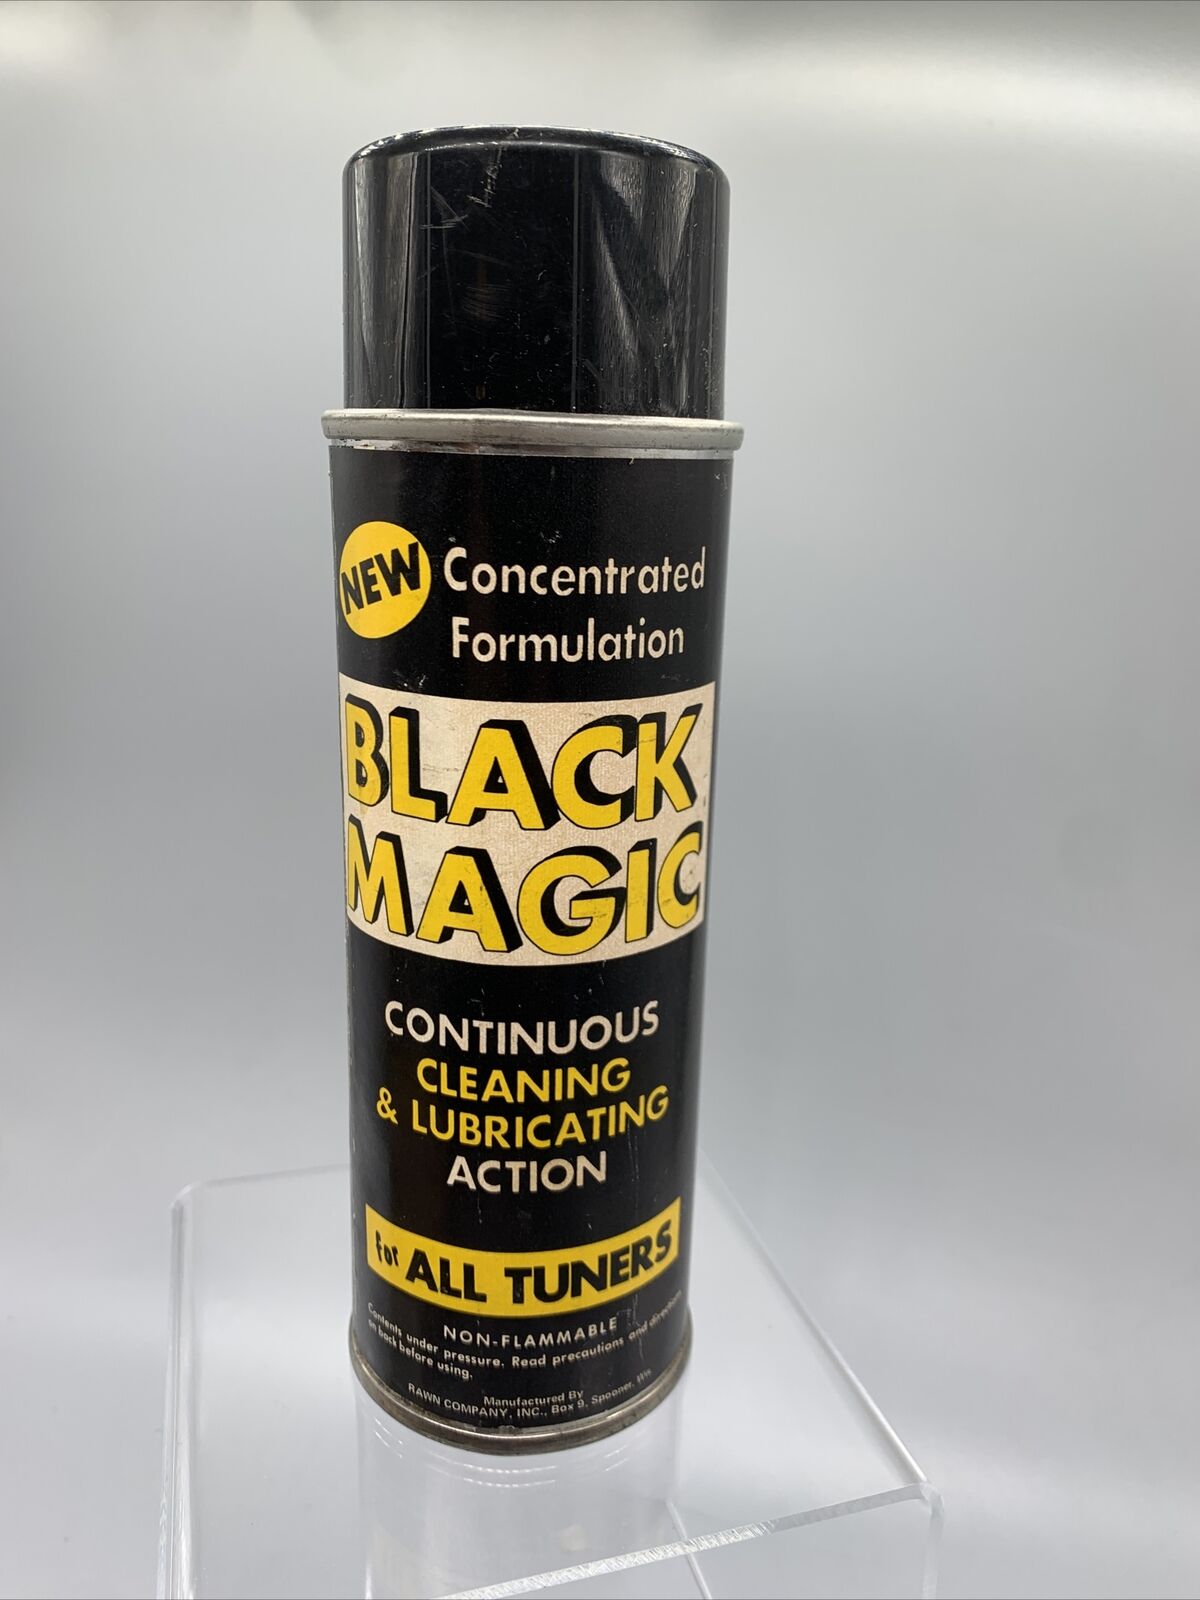 Black Magic Cleaning & Lubricating Action For All Tuners & Electronics